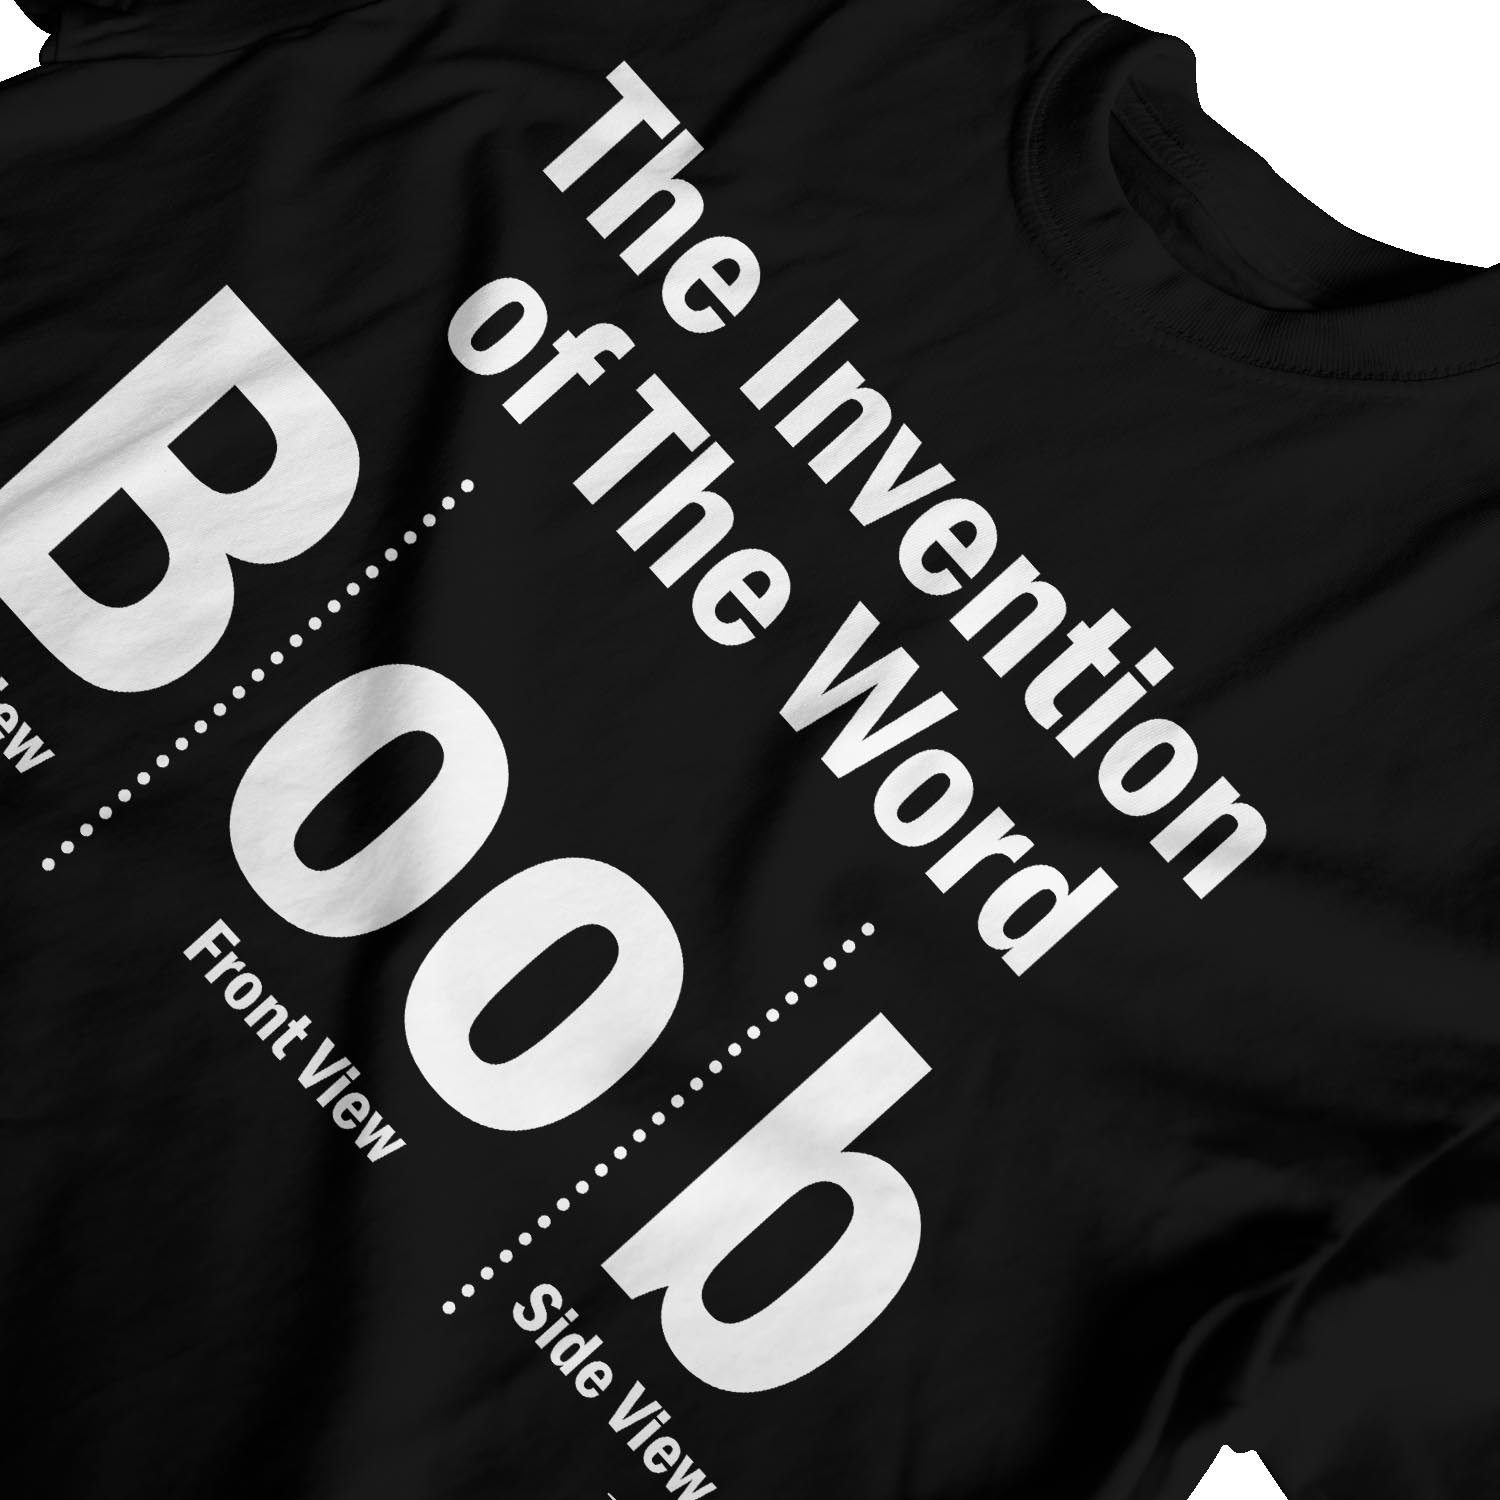 Invention Of The Word Boob Tank Top - TeeHex